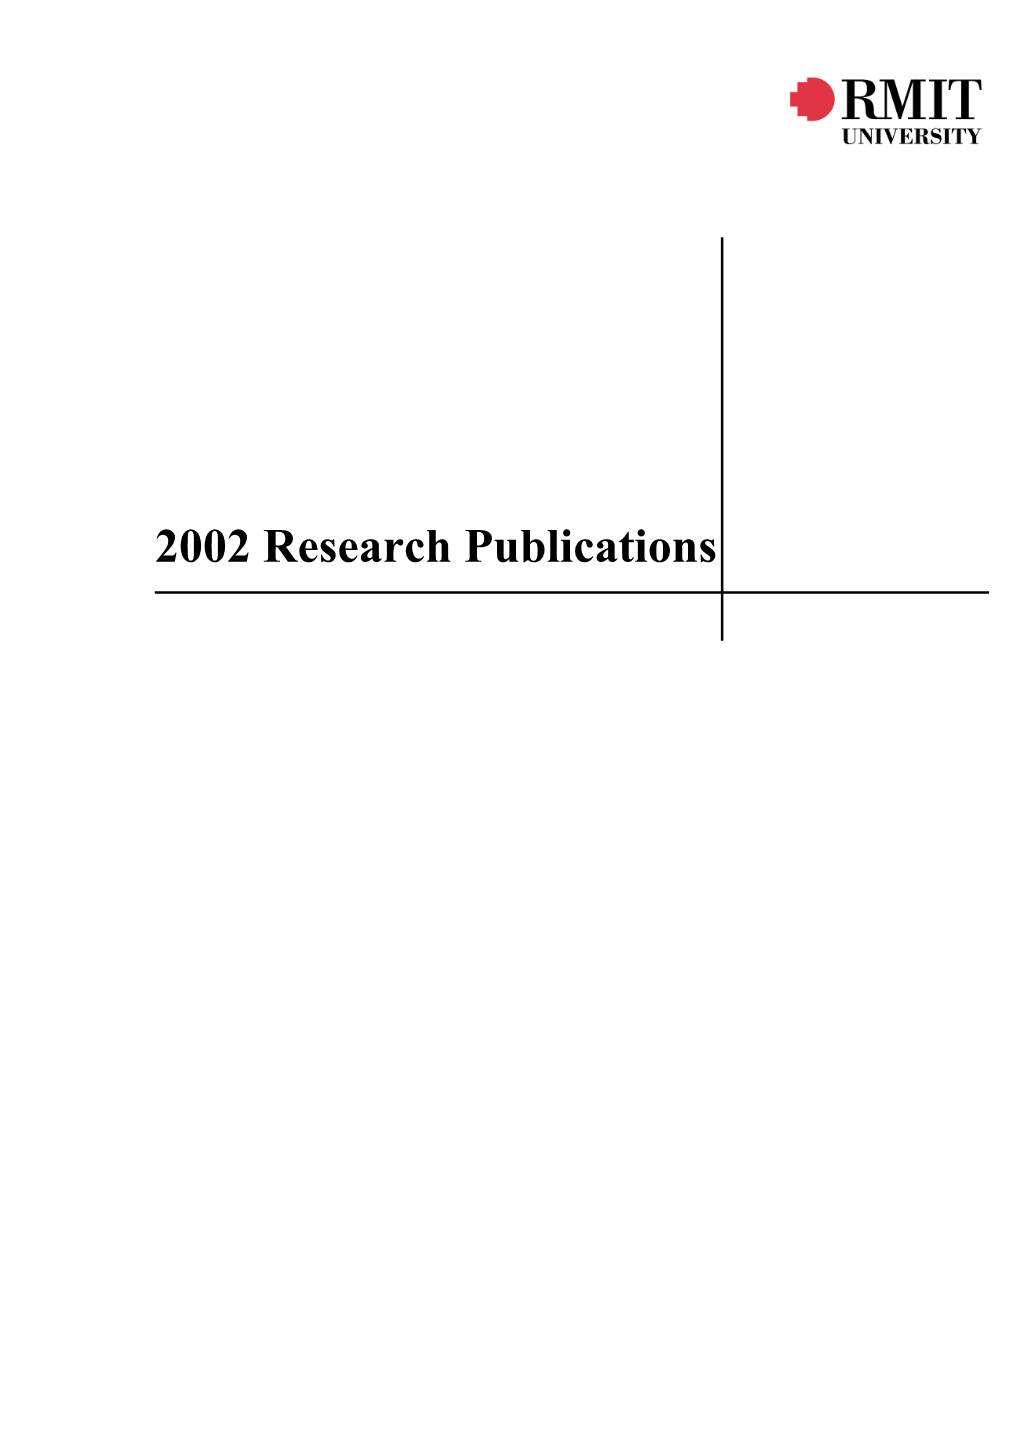 Areas Publishing in 2002